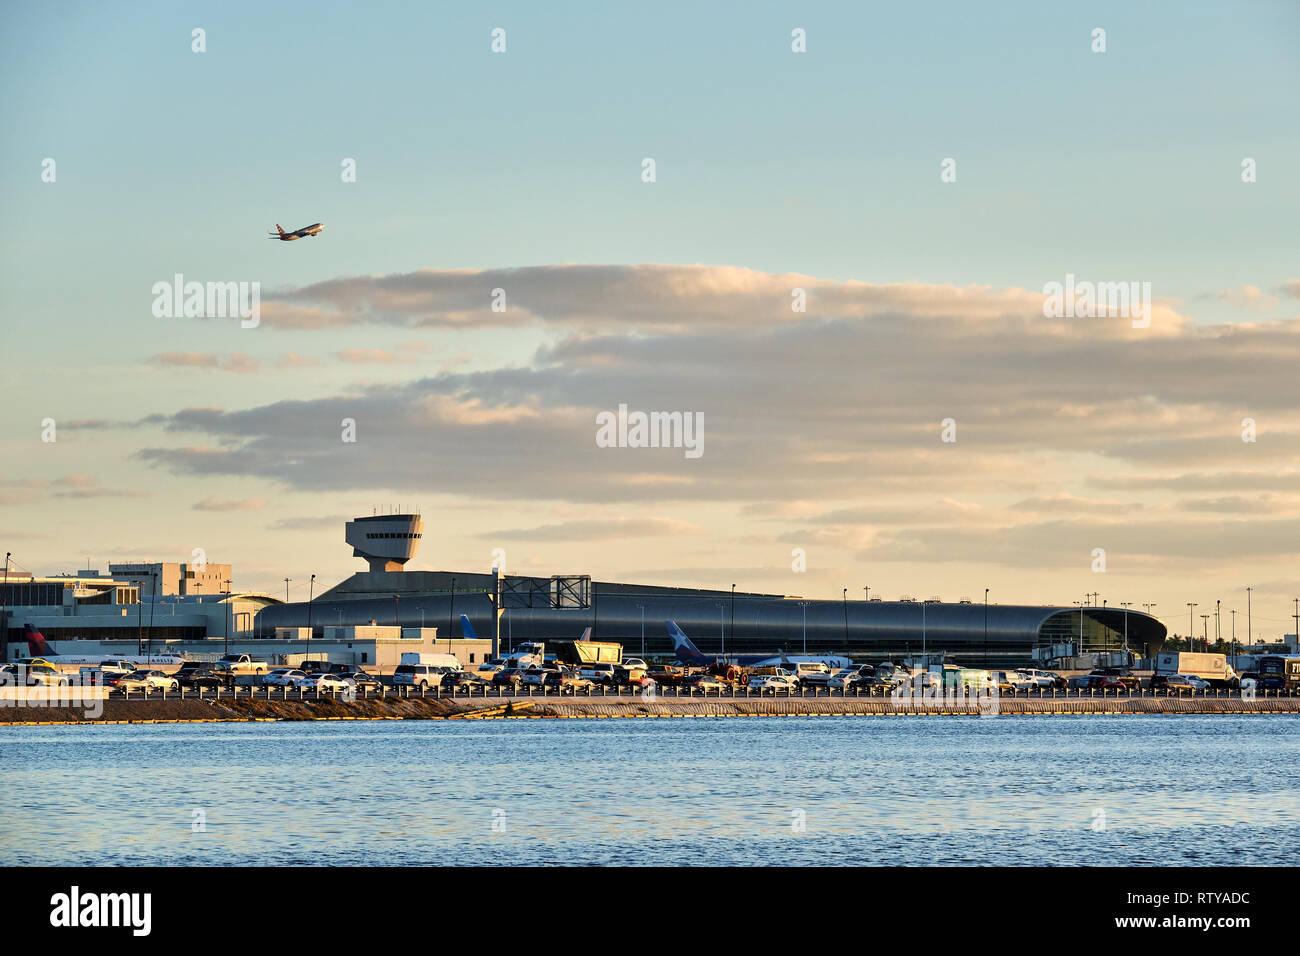 Pictured is an aircraft leaving Miami International Airport, Florida. Stock Photo